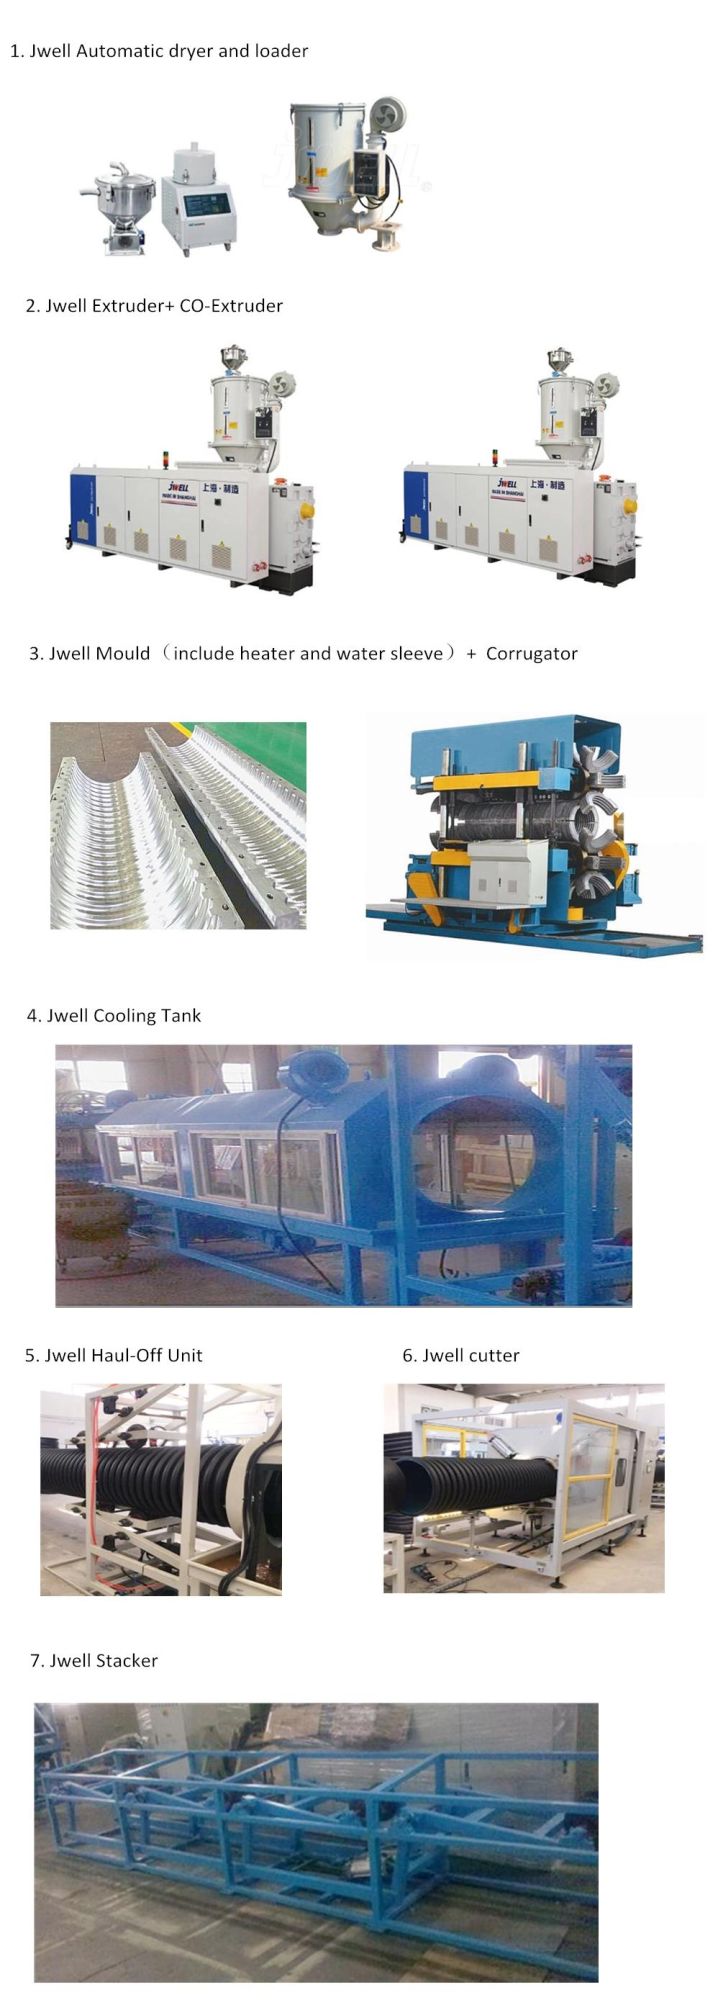 Double Wall (DWC) Single Wall (SWC) Corrugated HDPE PE PPR PVC Plastic Pipe Extrusion Line